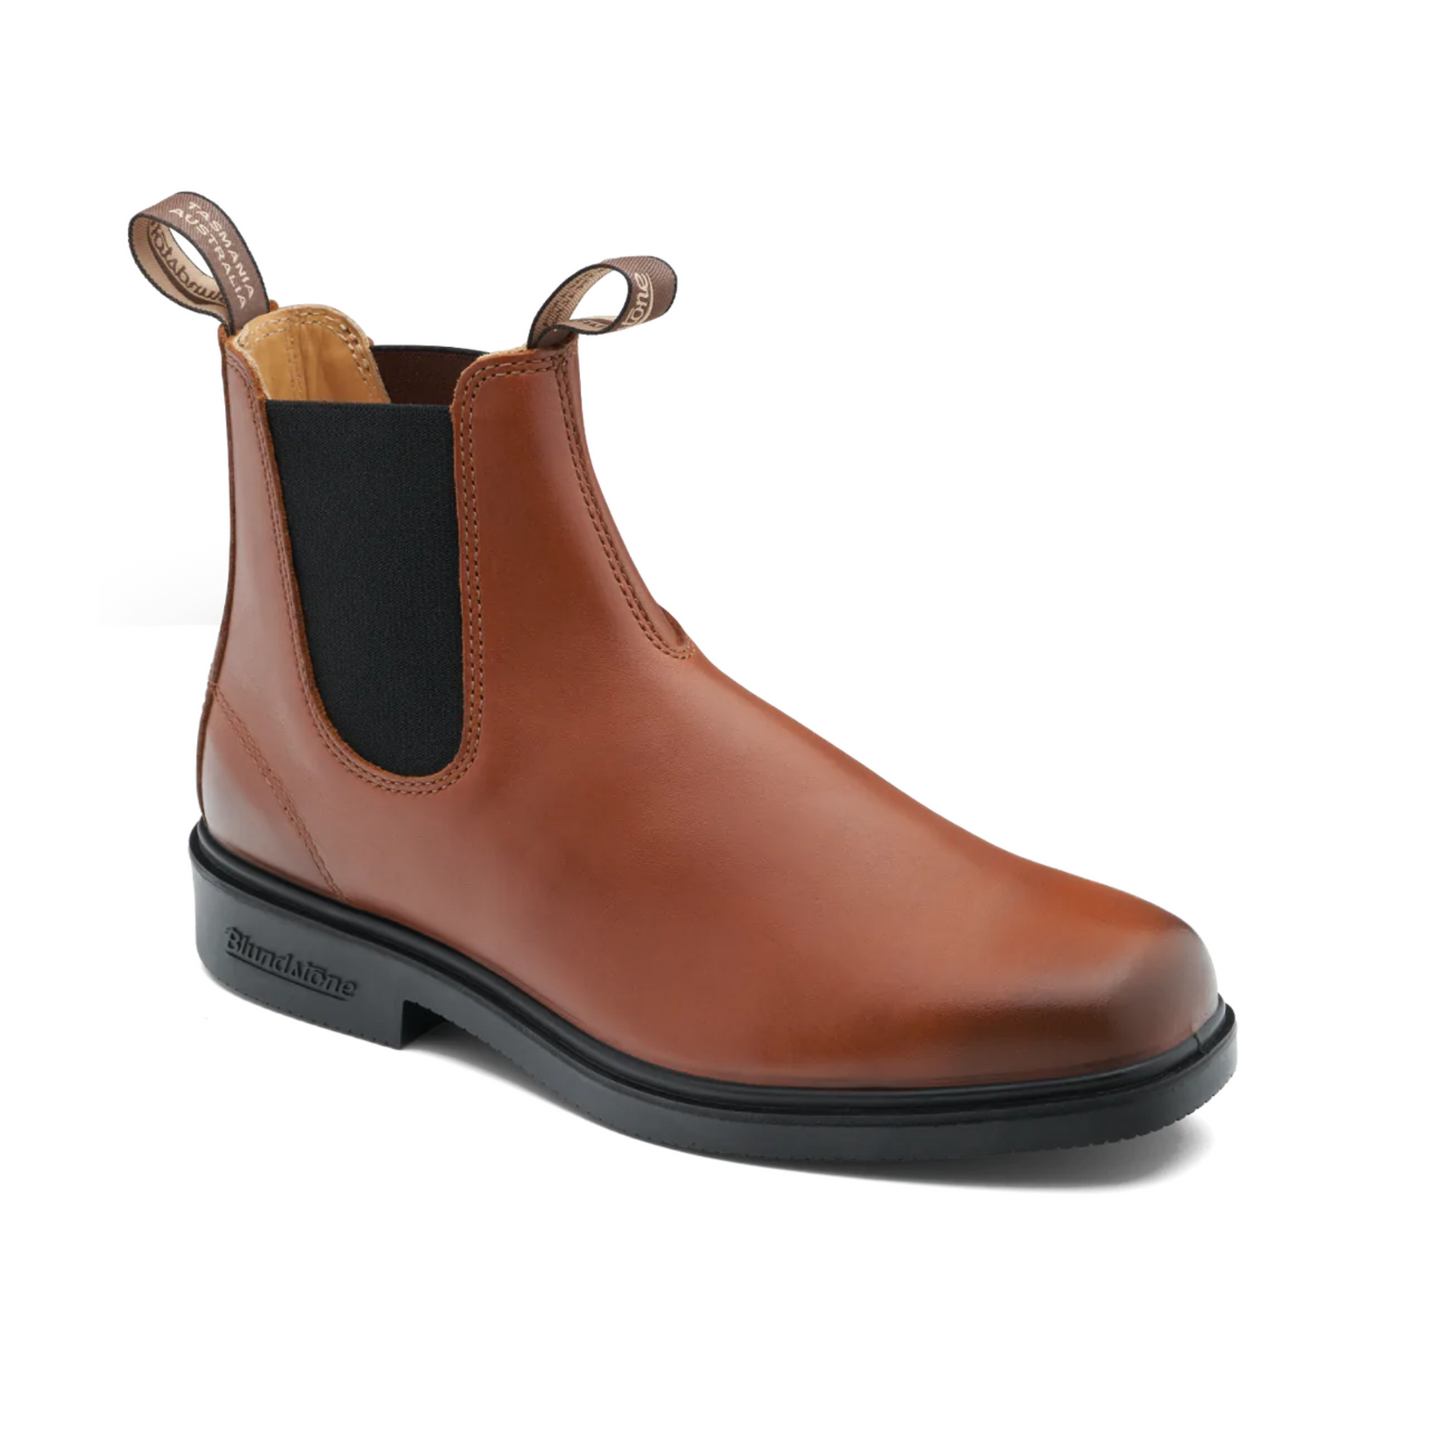 Front angled profile of the Blundstones Cognac Dress Boots 2244.